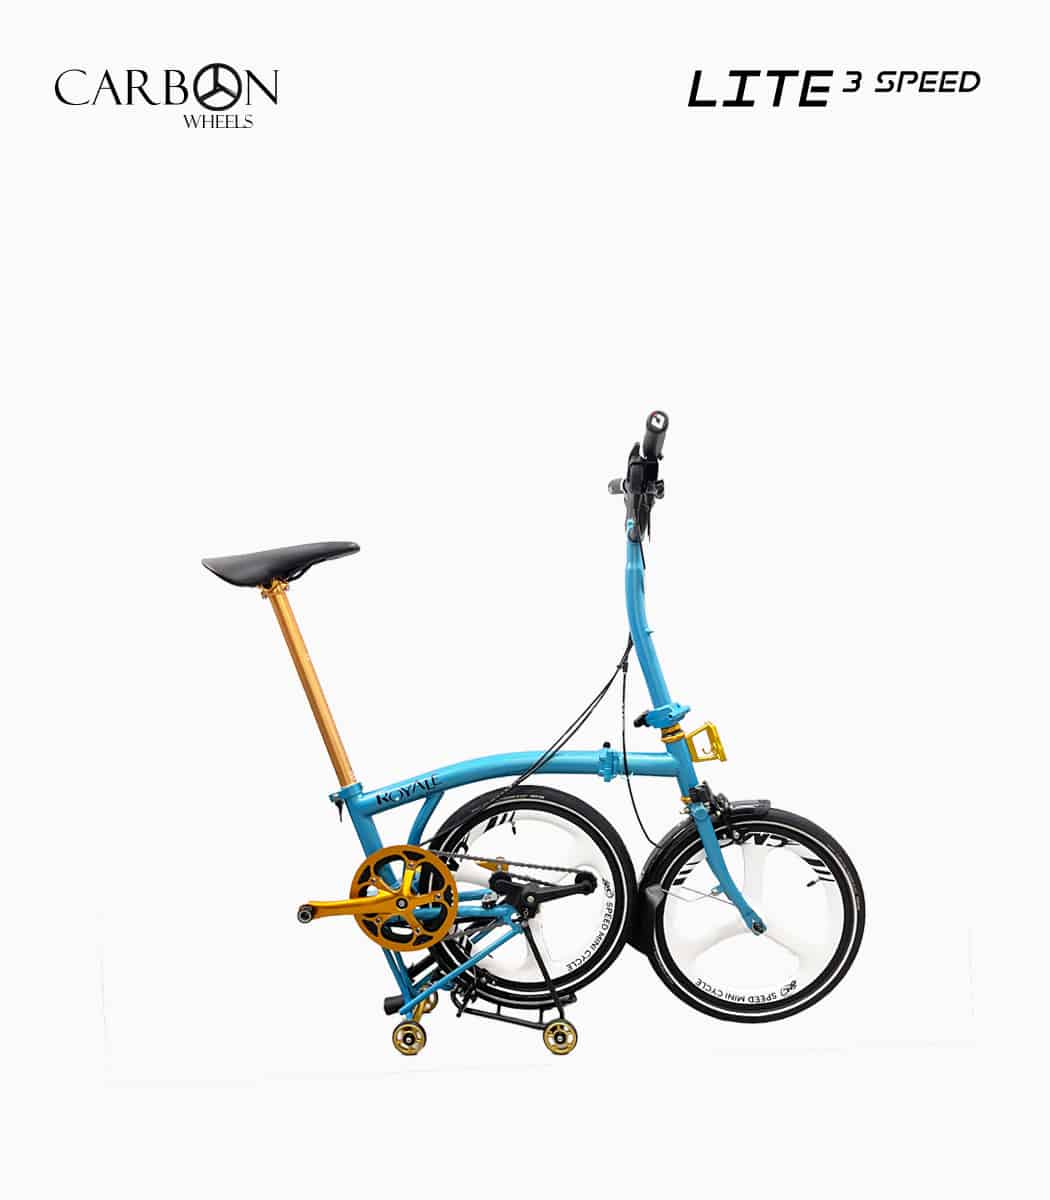 ROYALE Carbon Lite M3 (SKY) foldable bicycle half folded right